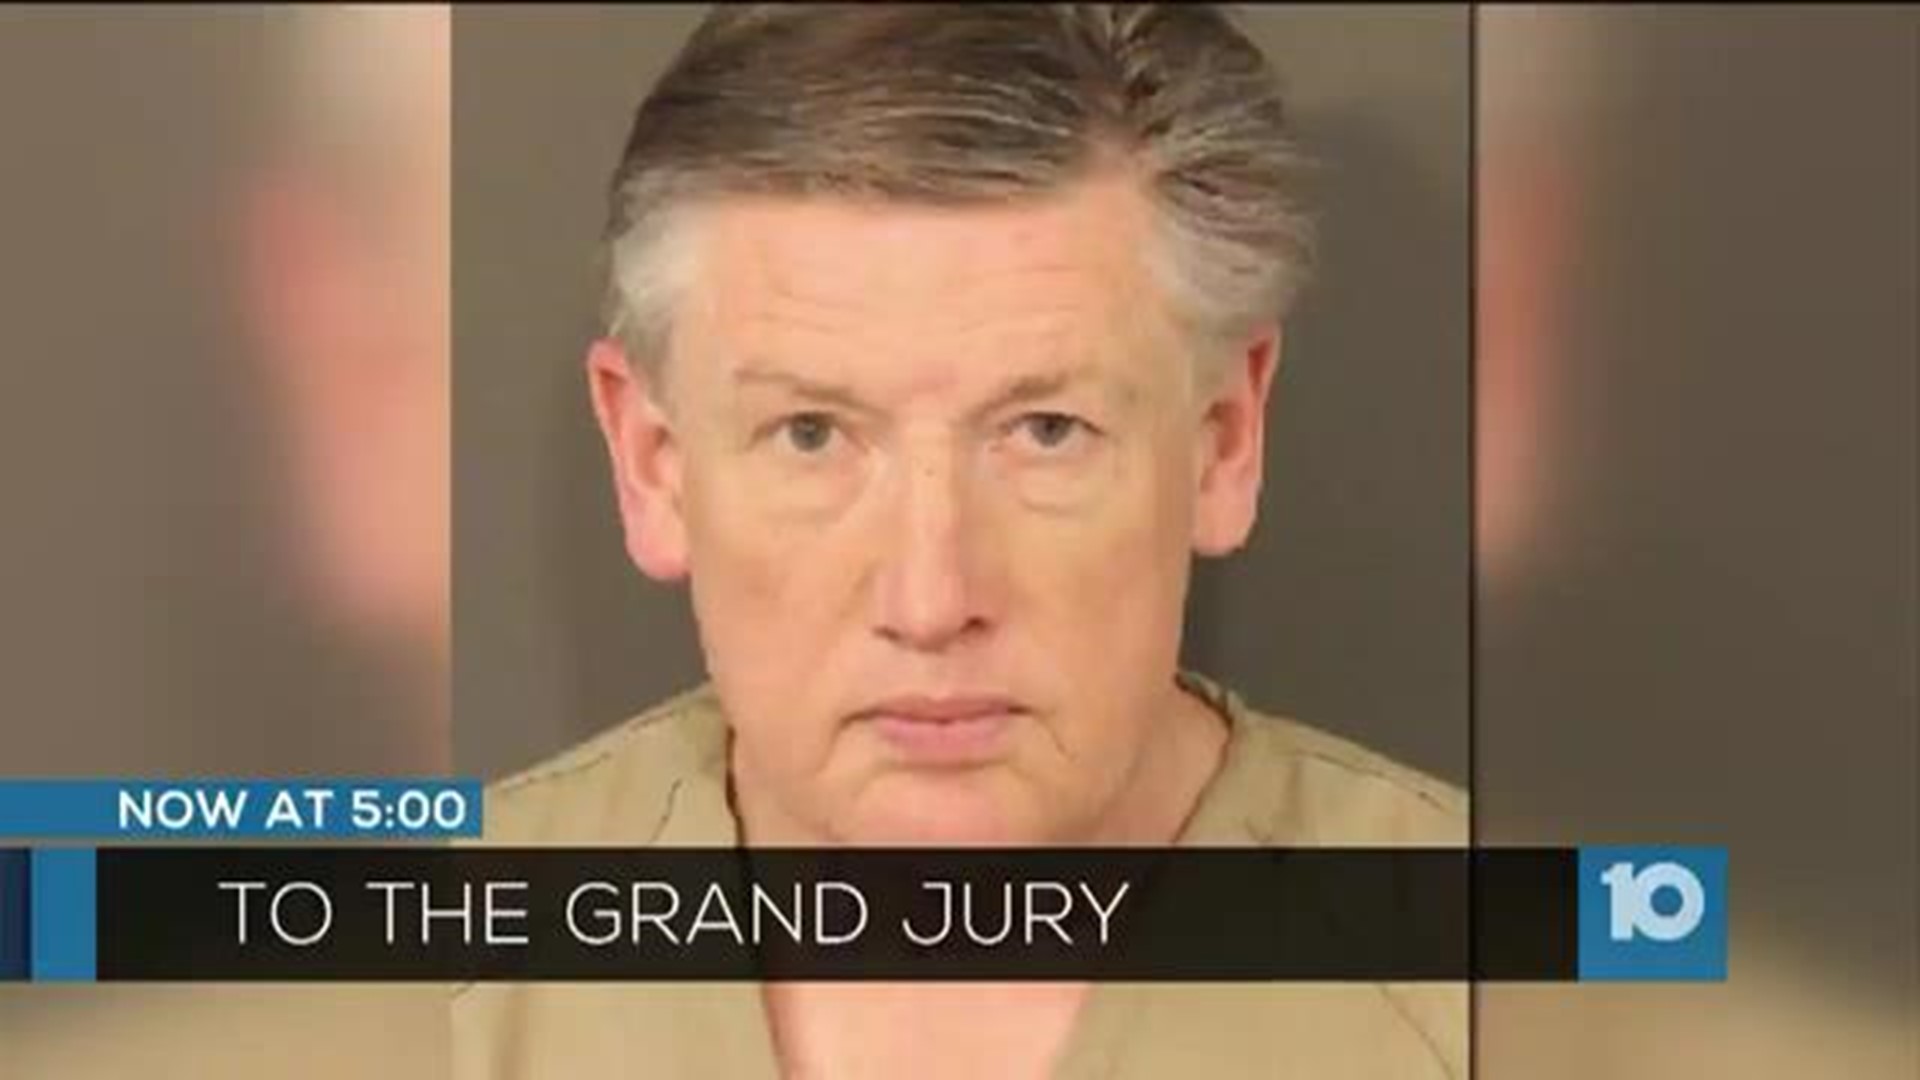 Mike Davis child porn case headed to grand jury; additional charges could be filed